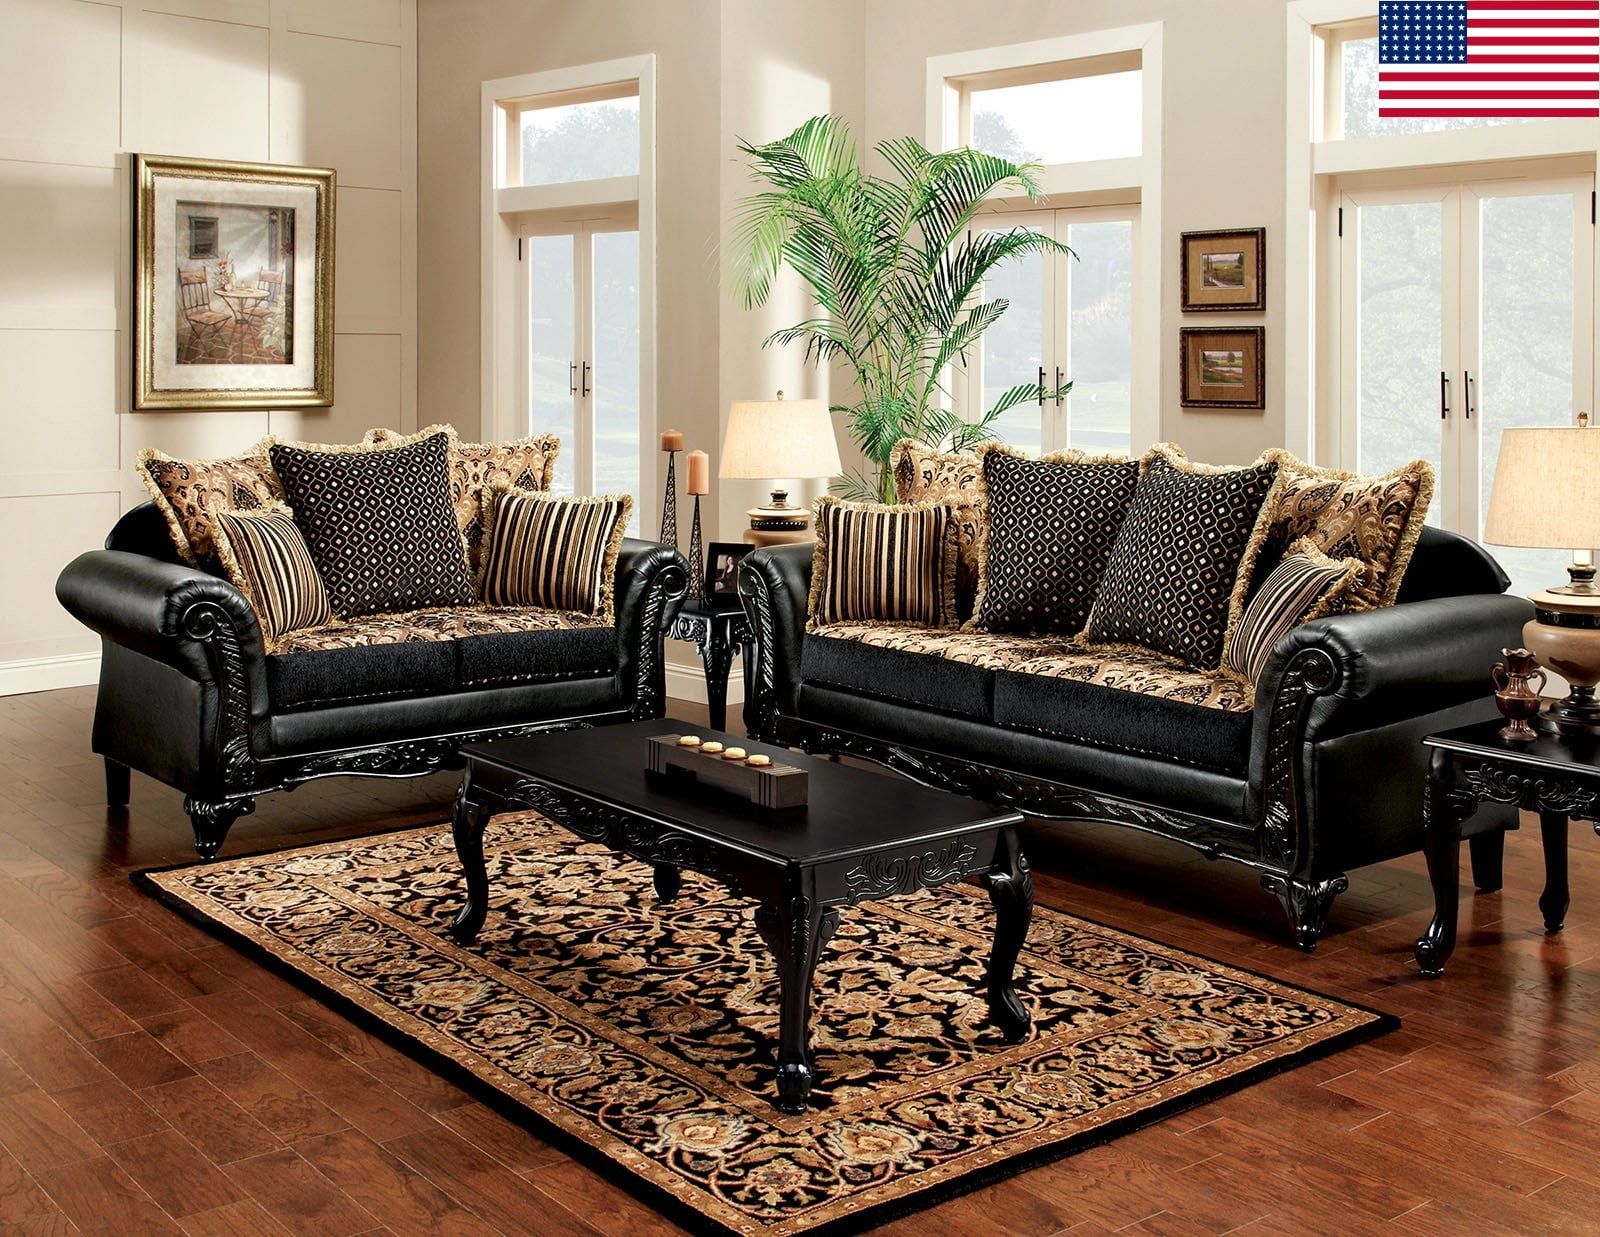 Formal Traditional Living Room Sofa Loveseat Black Couch Pillows Chenille  Fabric Antique Rolled Arms Wood Trim Usa – Walmart With Regard To Traditional Black Fabric Sofas (View 11 of 15)